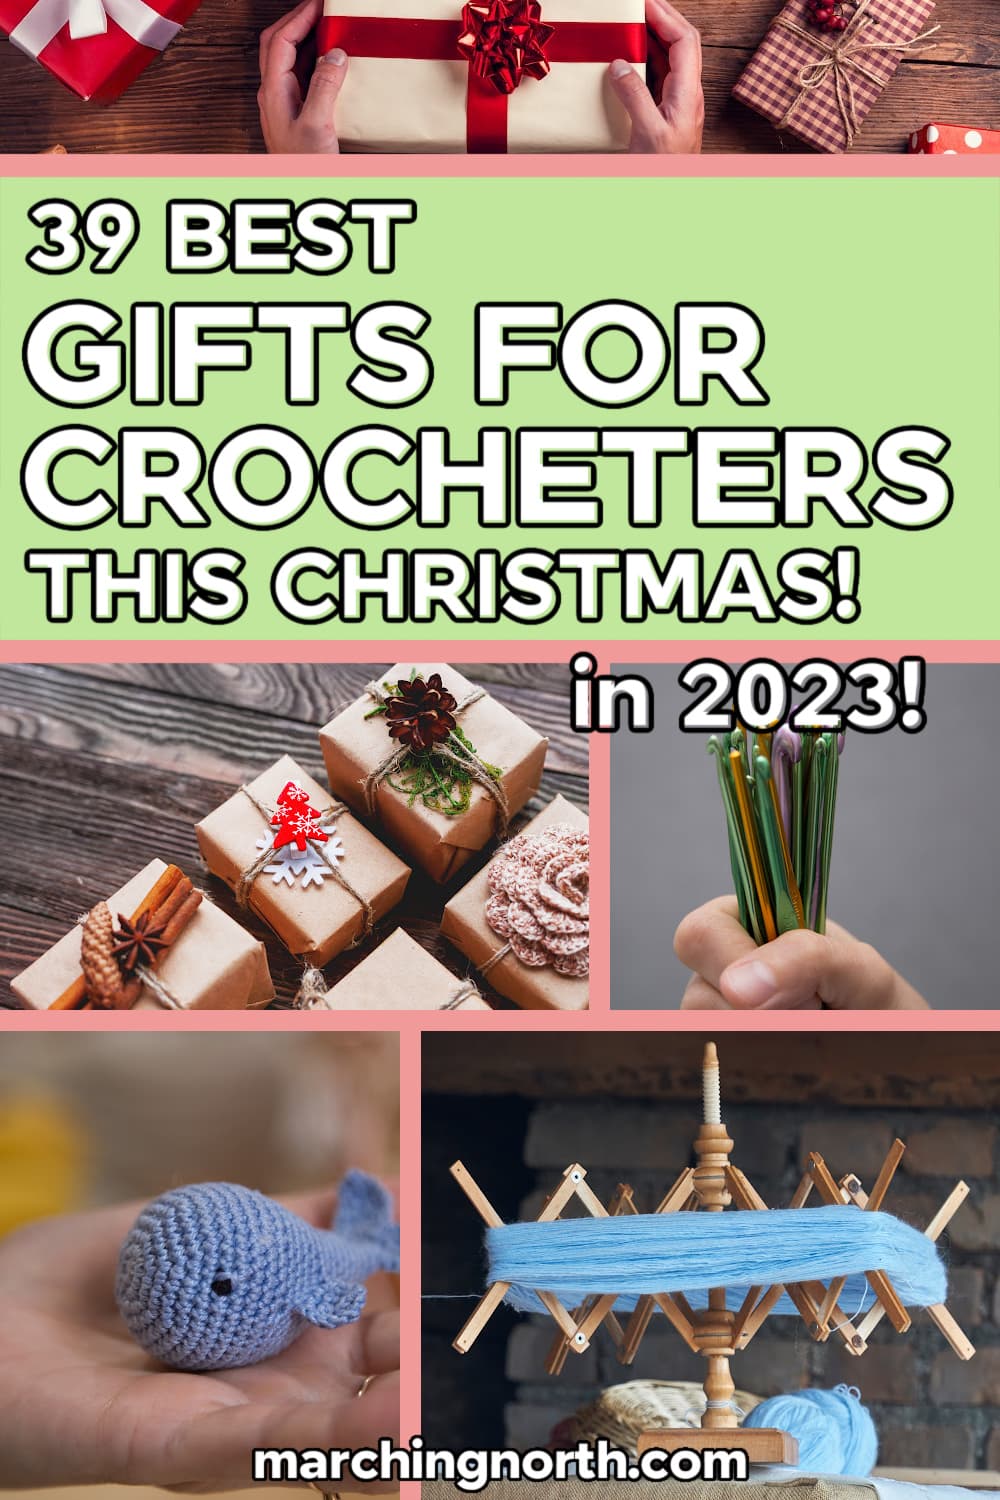 https://www.marchingnorth.com/wp-content/uploads/2023/10/25-best-gifts-for-crocheters-pin21.jpg